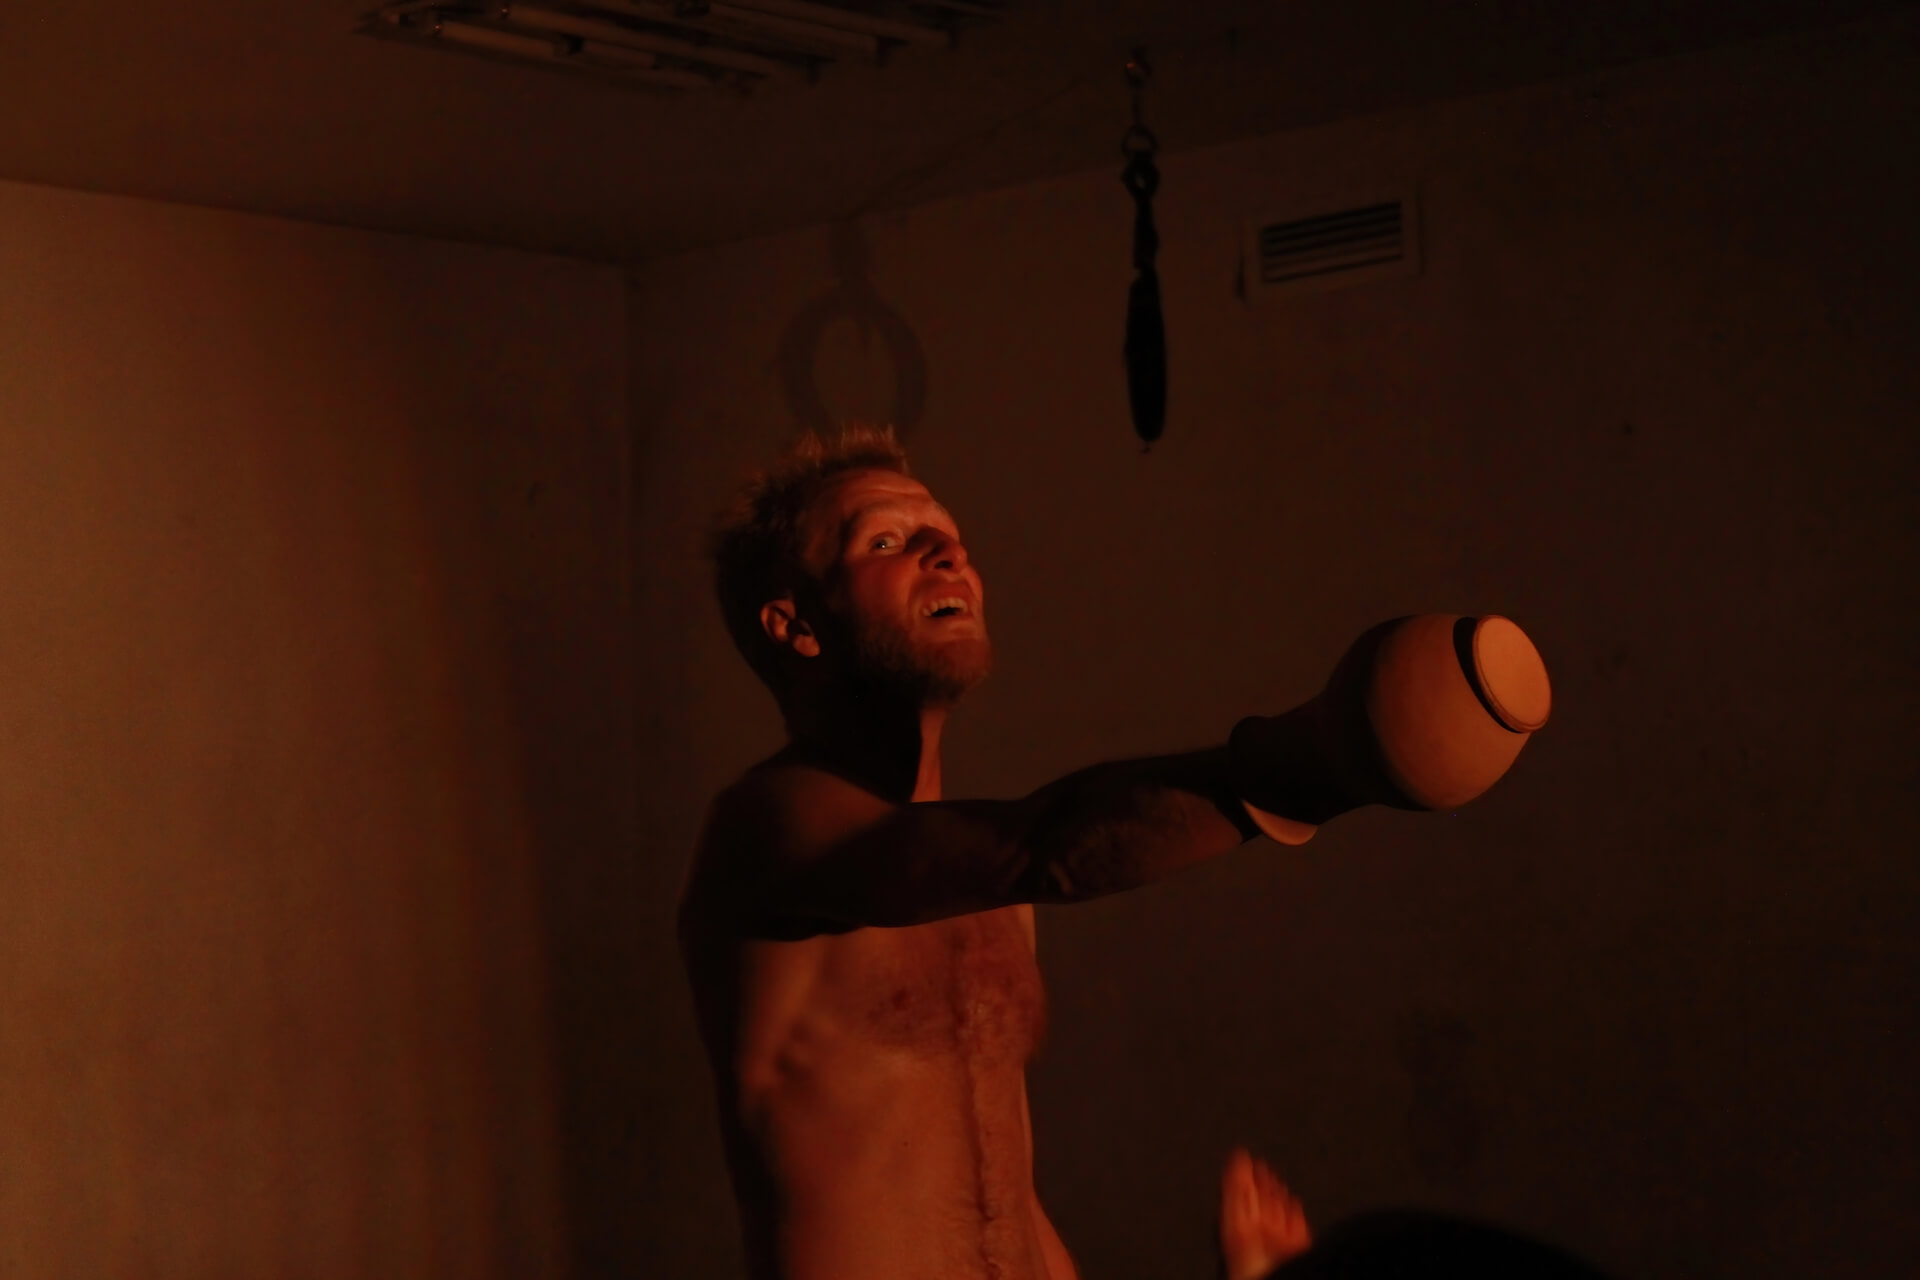 A performer standing in the middle of a dark empty room. He takes his hand stuck in a vase to the front.